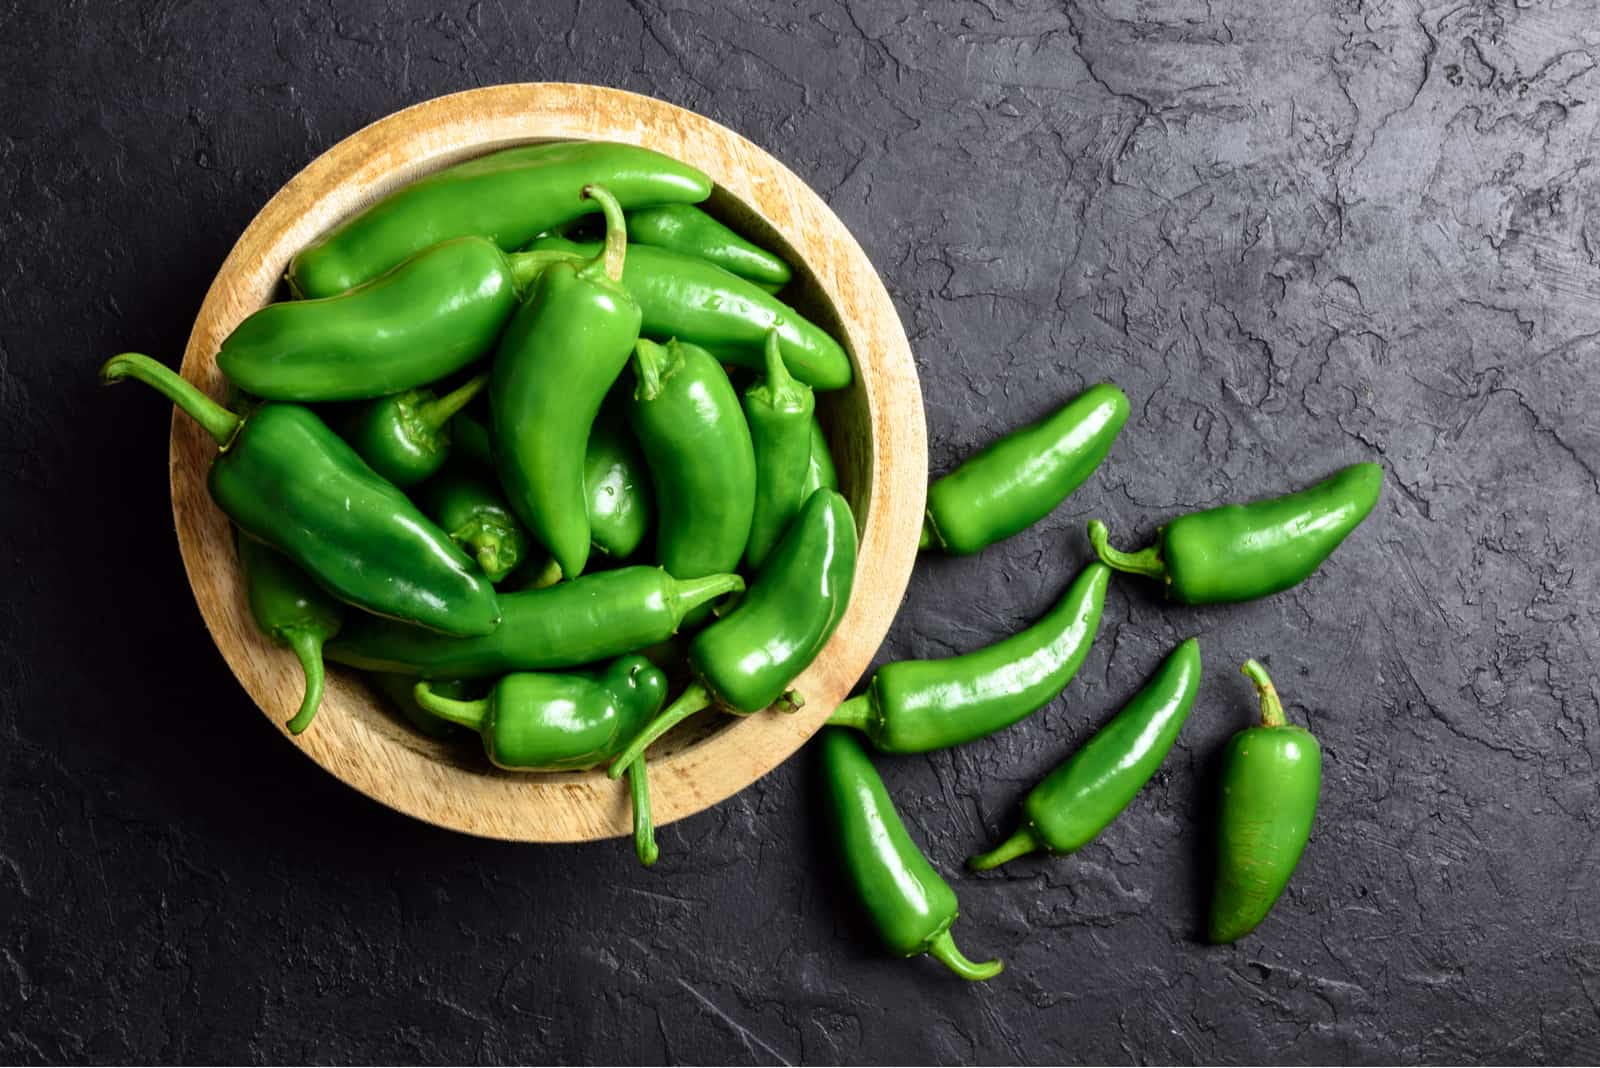 Can Dogs Eat Jalapenos? The Effects Of Spicy Foods On Dogs